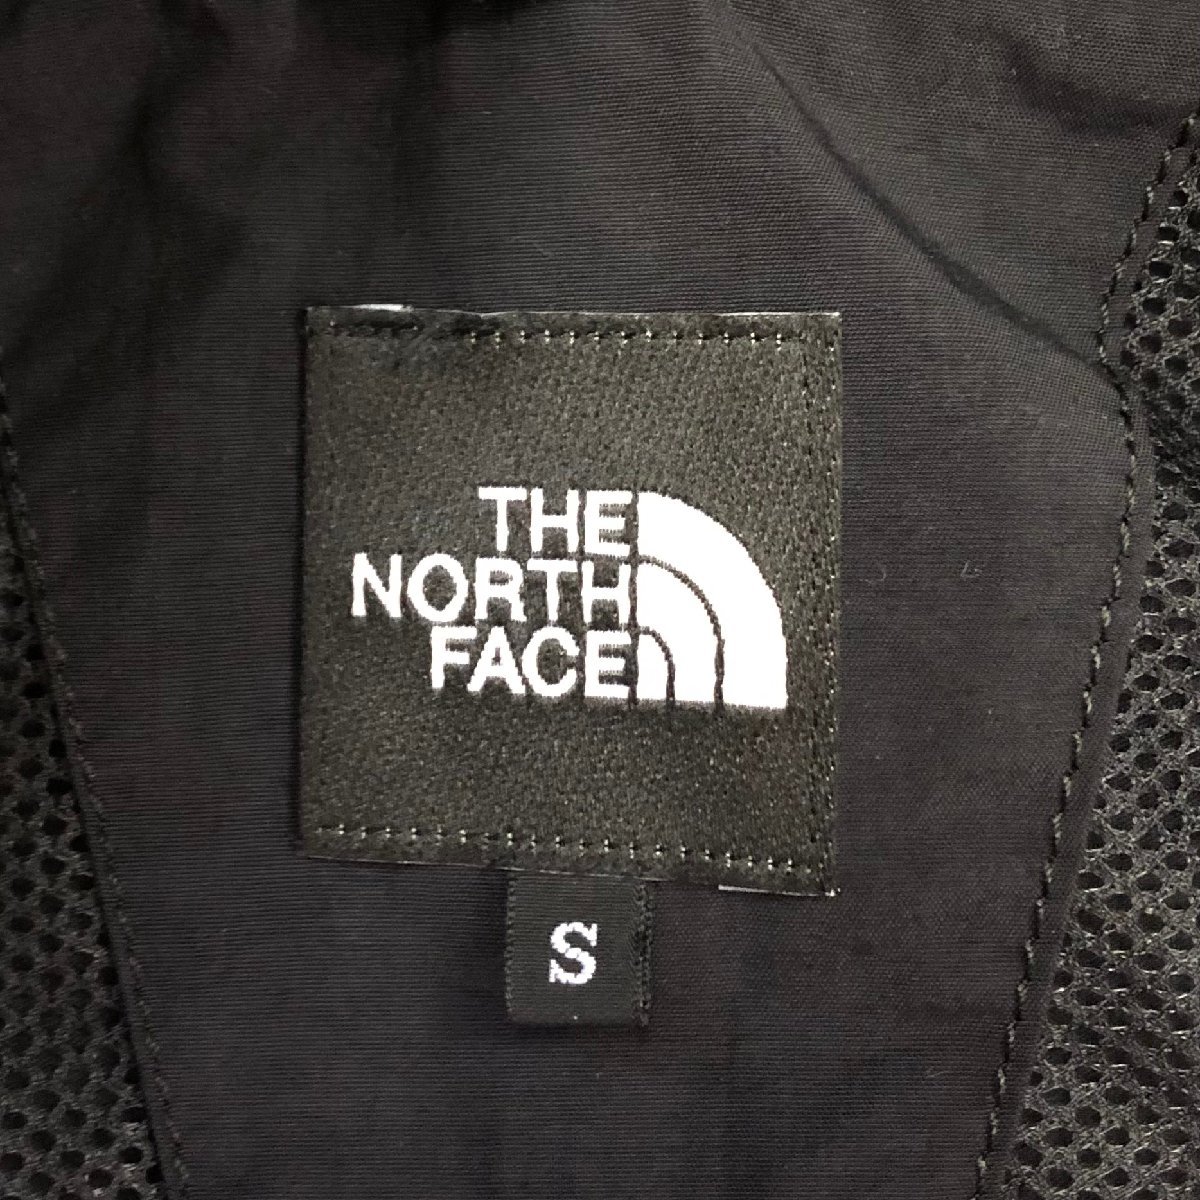 THE NORTH FACE HYDRENA WIND JACKET NP21835 PINK S ザノースフェイス ハイドレナウィンドジャケット ピンク_画像4